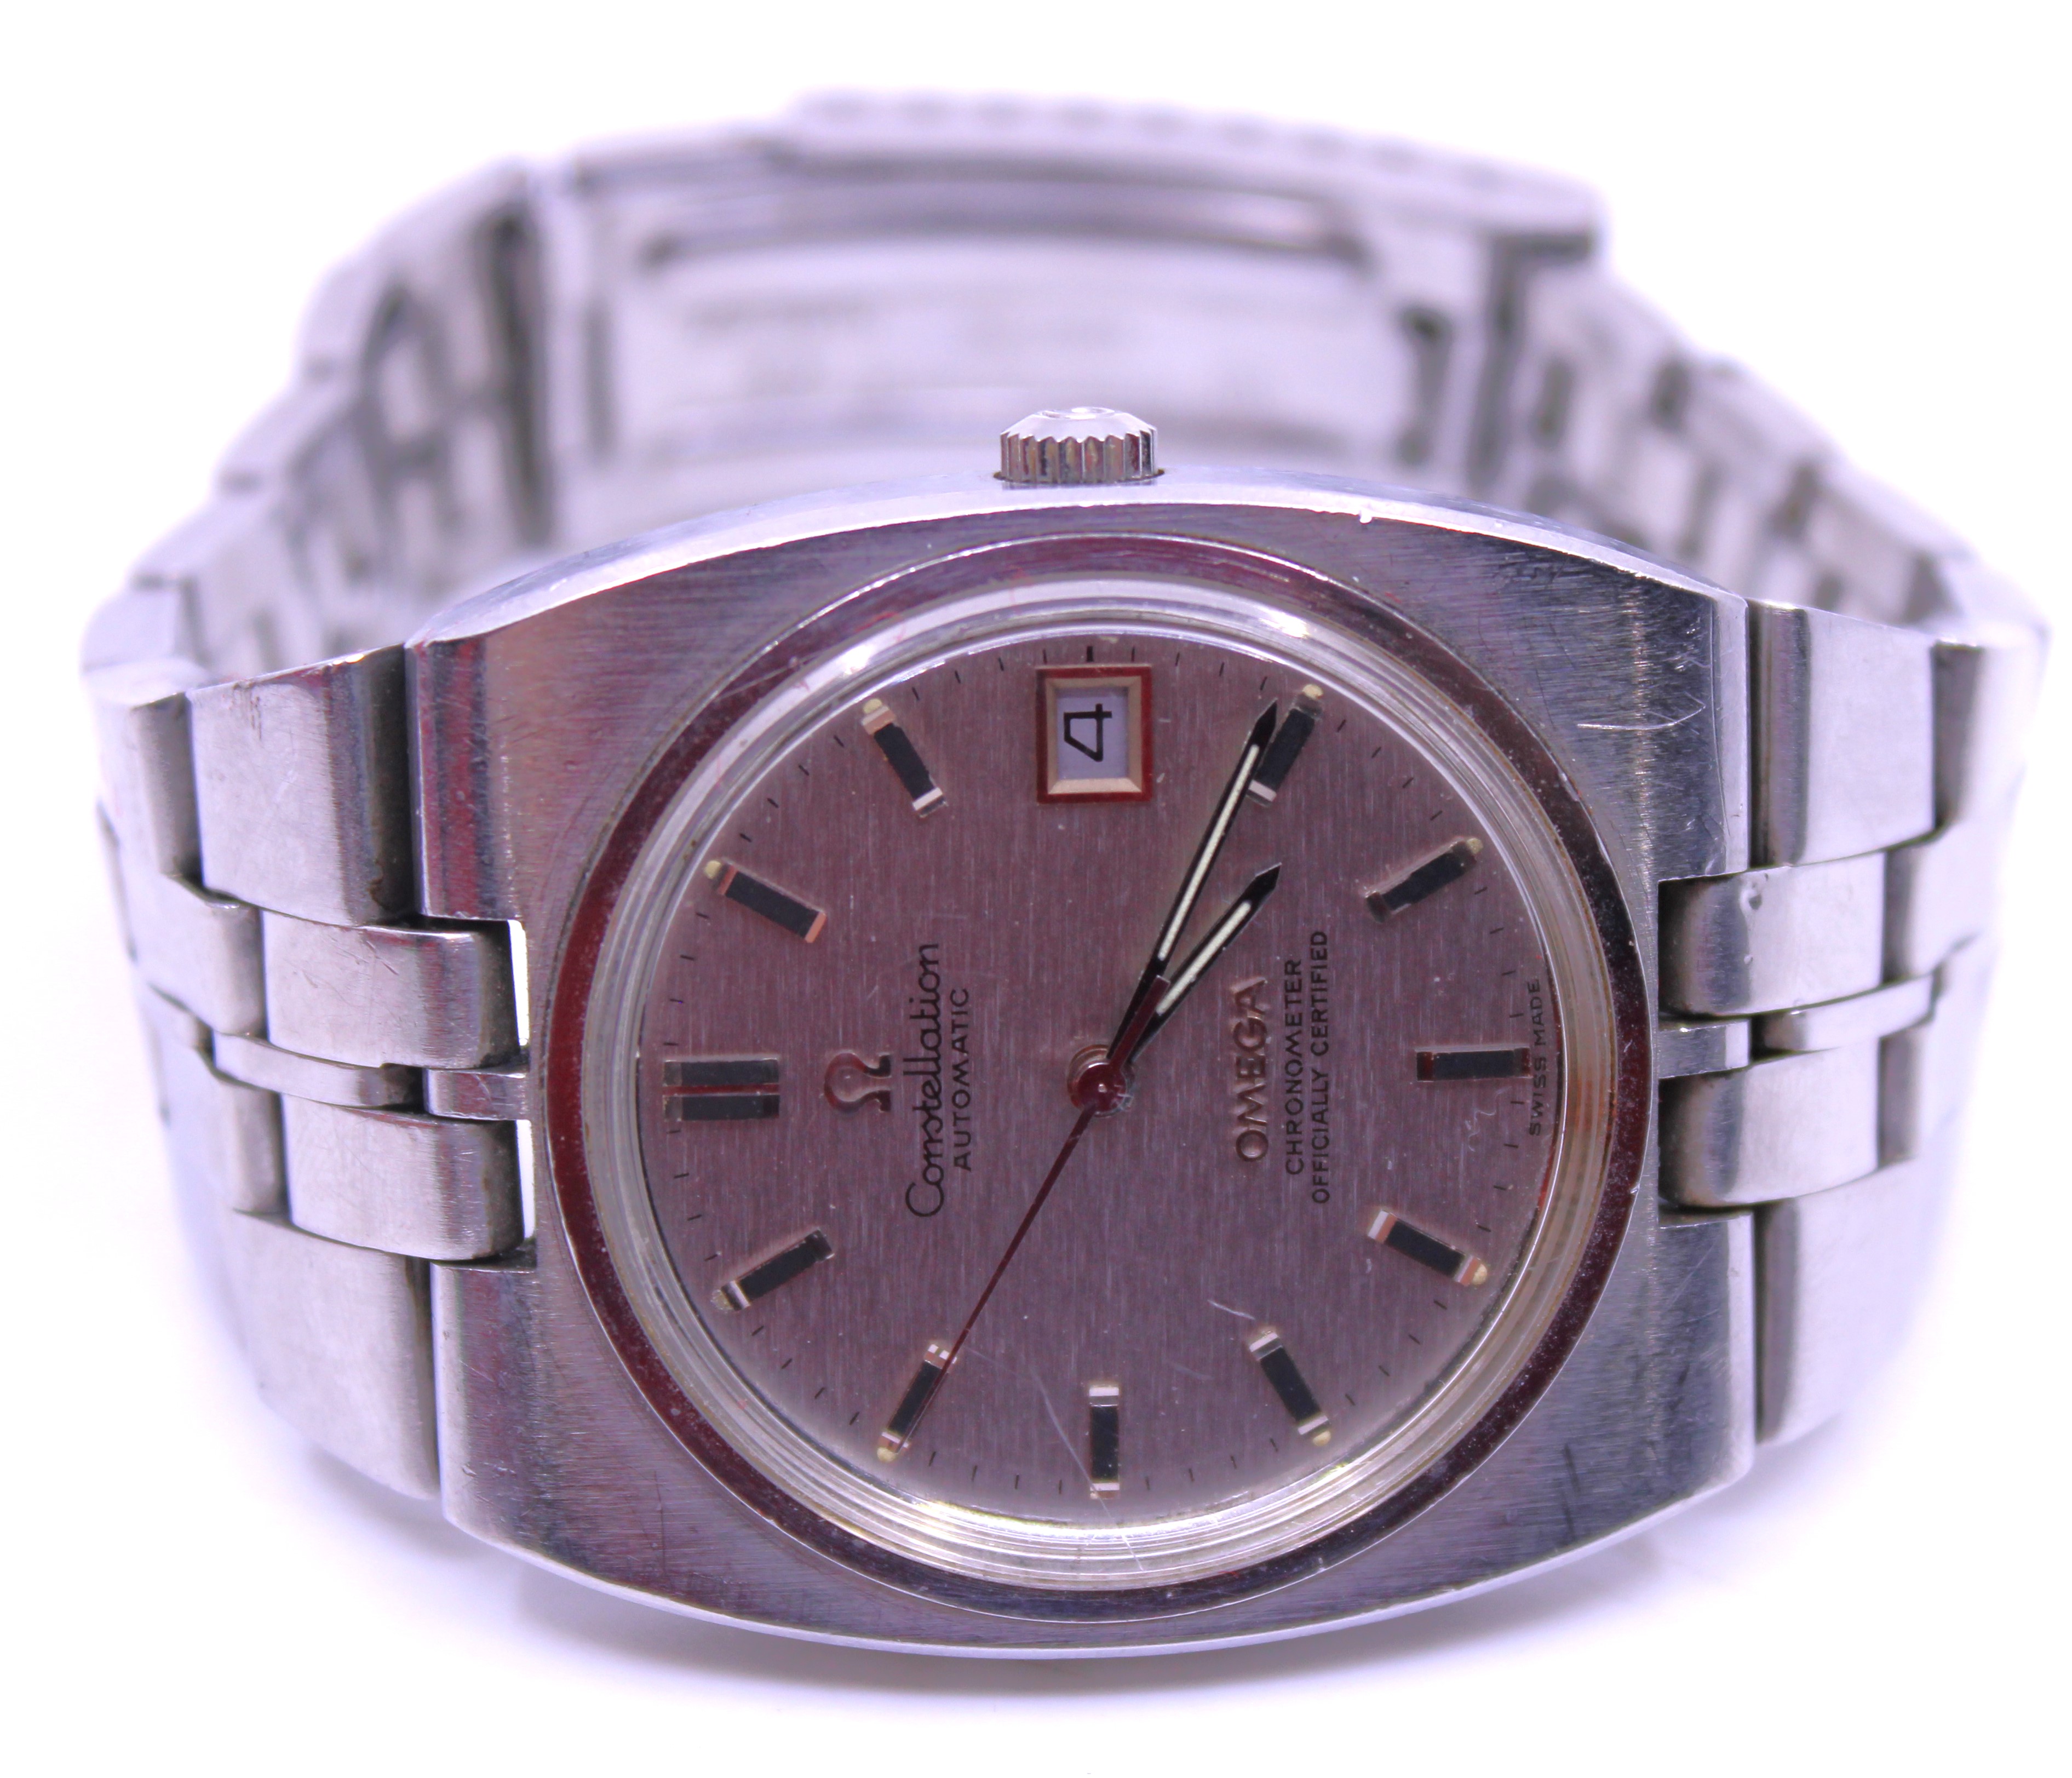 Men's Vintage 1970's? Omega Constellation Automatic Watch. Comes boxed with International Guarantee. - Image 2 of 7